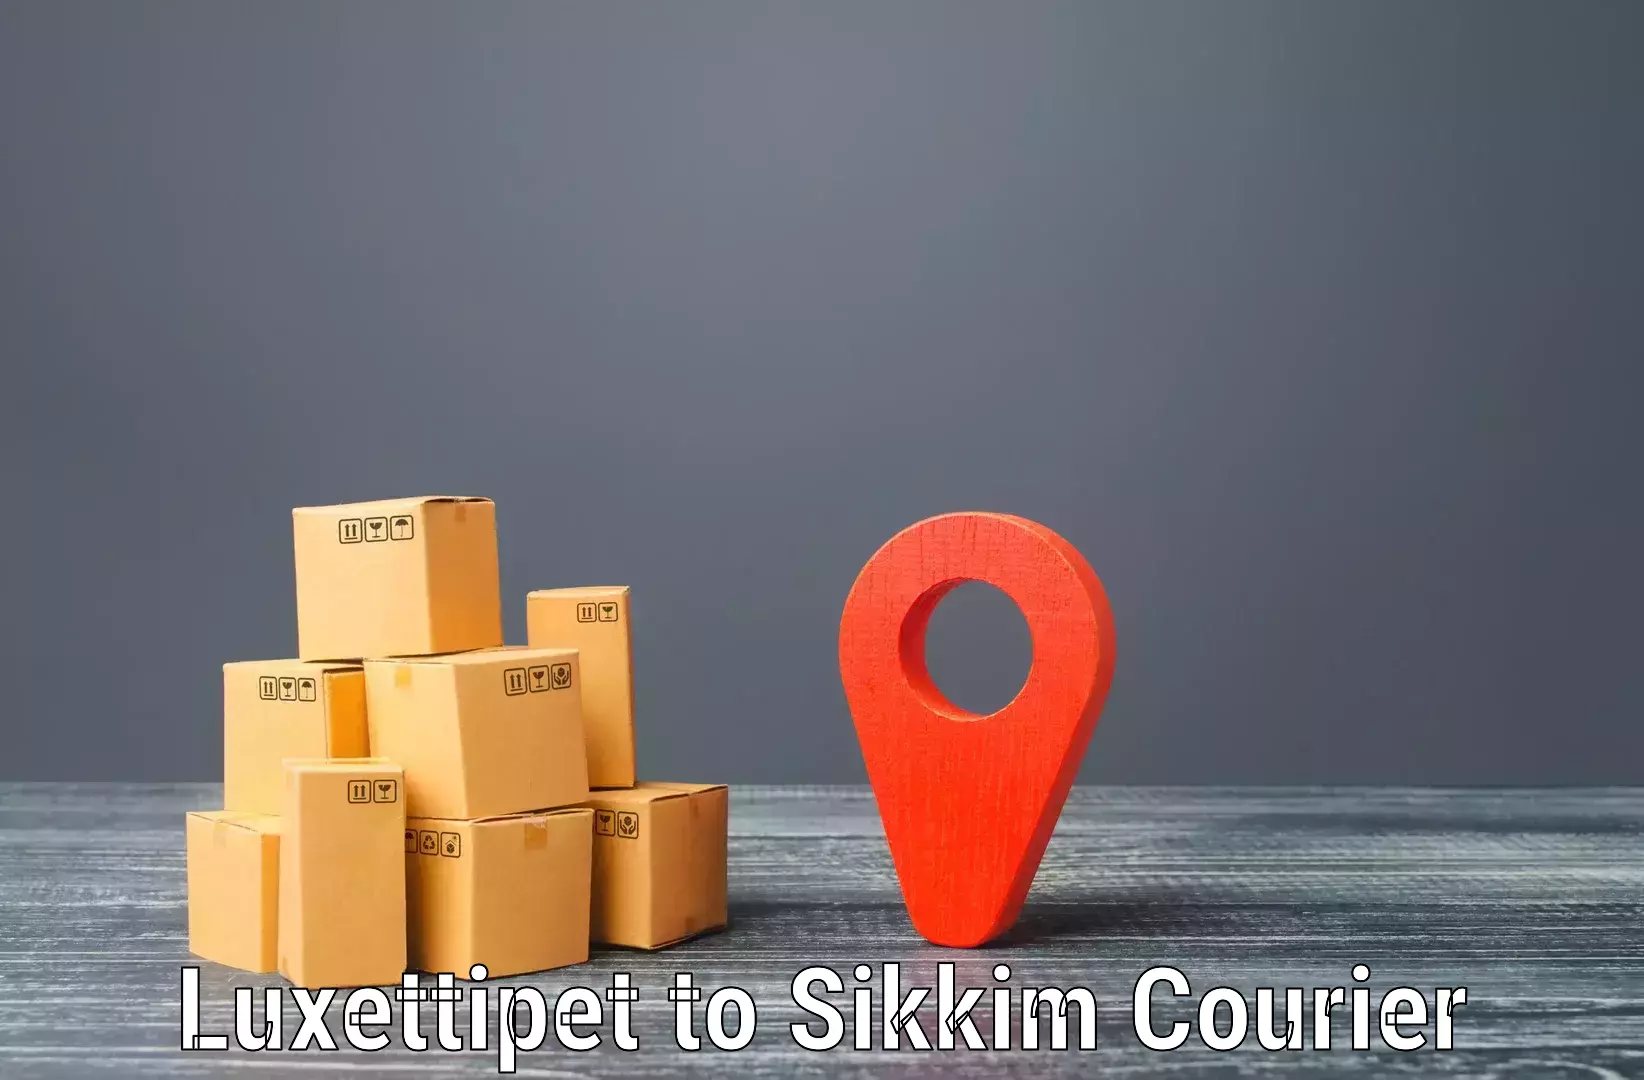 Courier service booking Luxettipet to North Sikkim